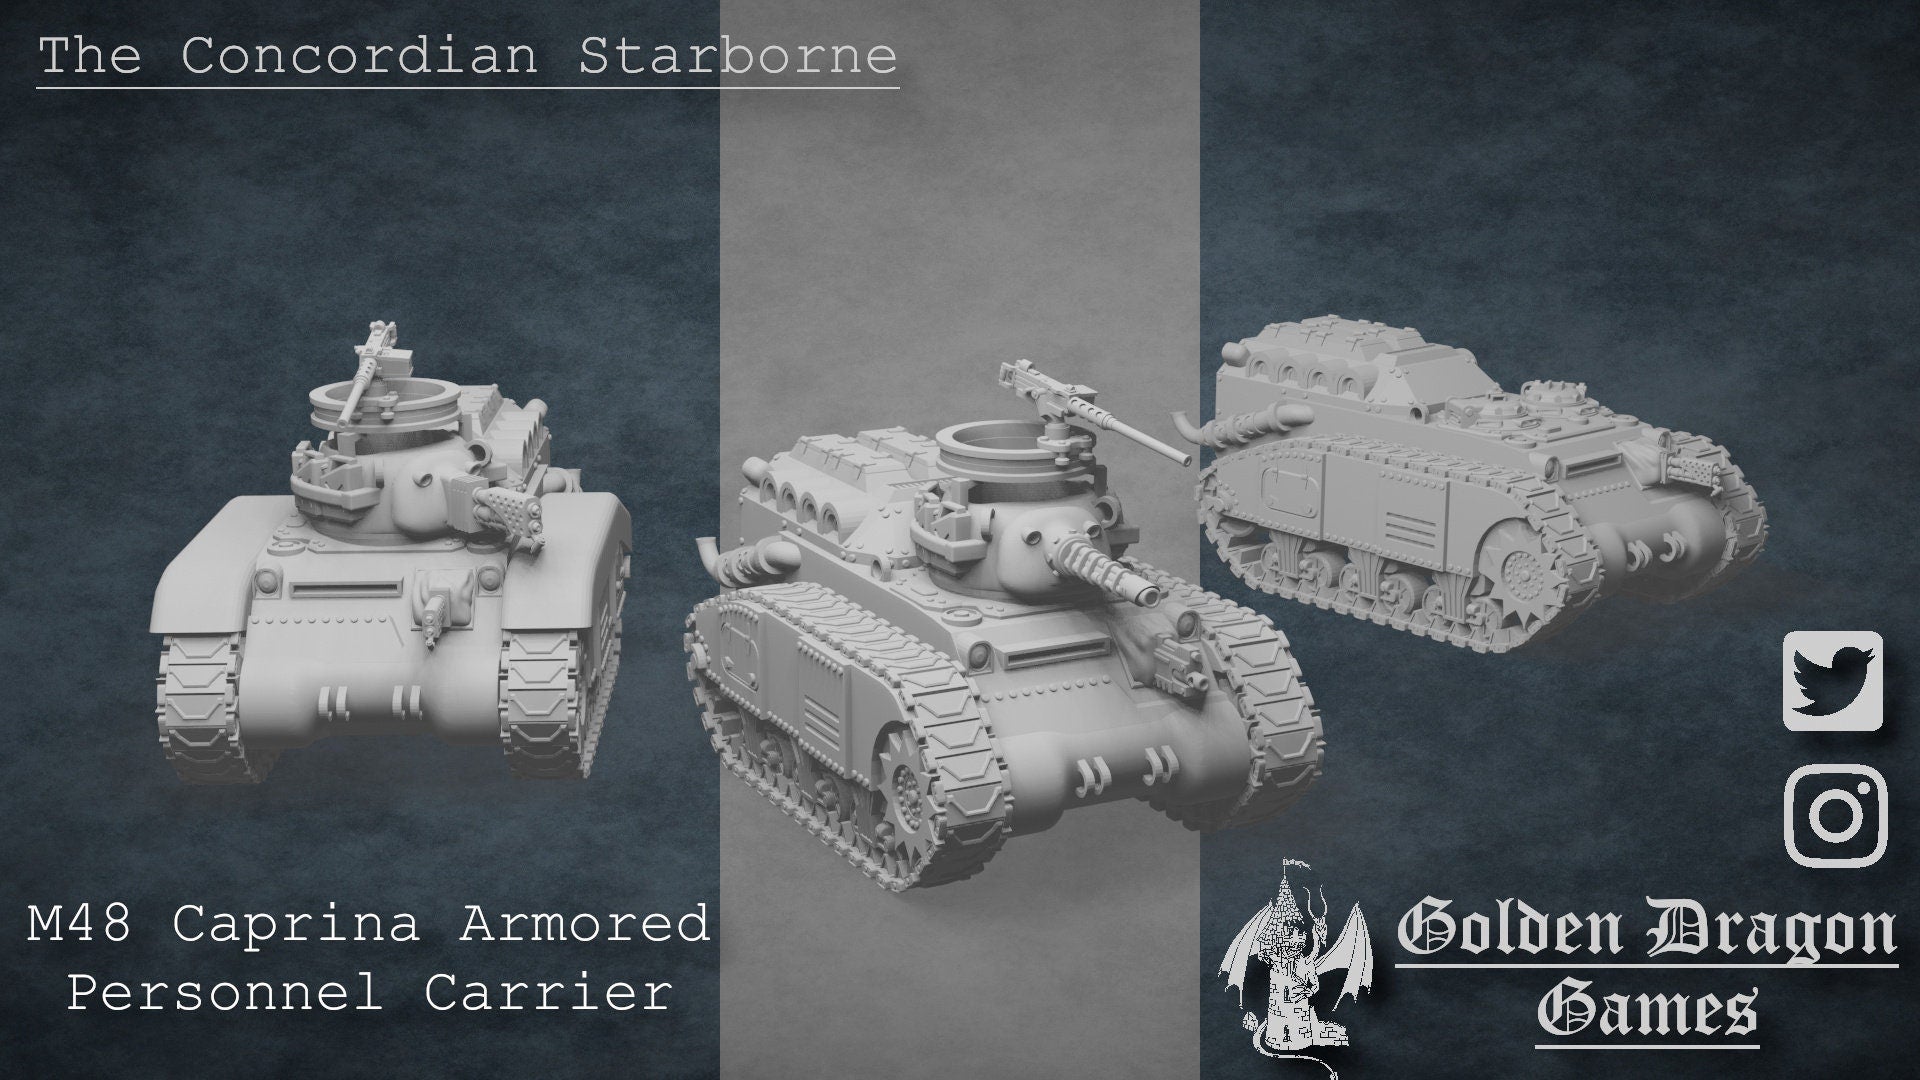 M48 Caprina Armored Personnel Carrier - Trisagion Models